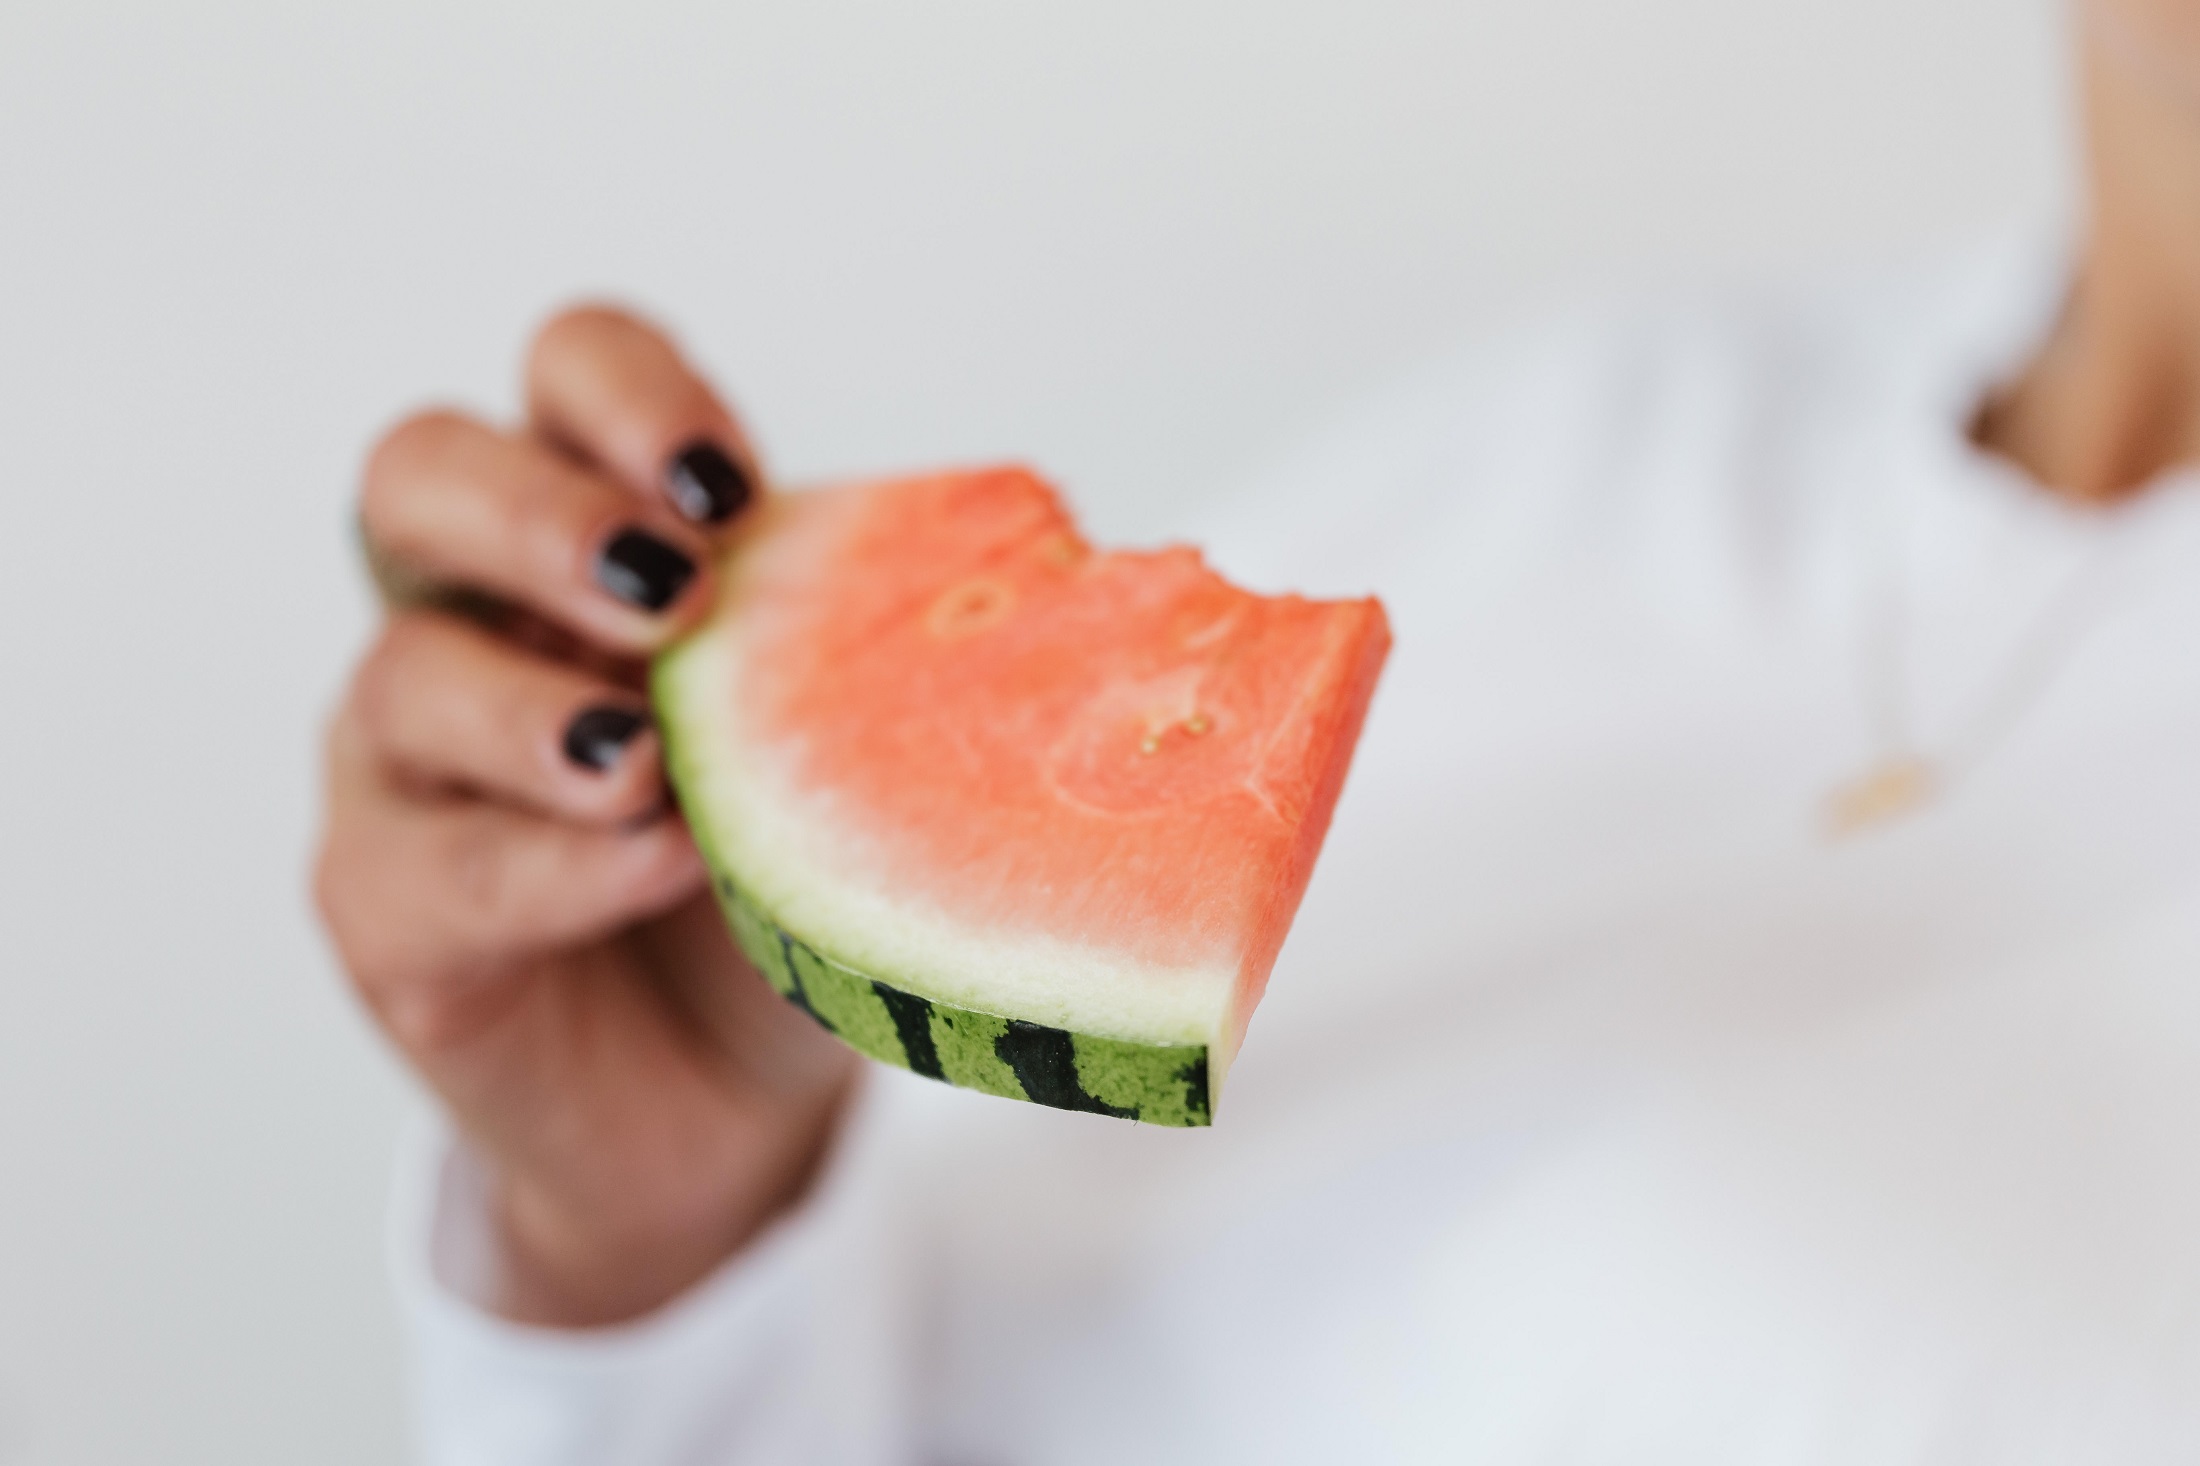 Watermelon seed oil is a beauty hit. We suggest how and when to use it